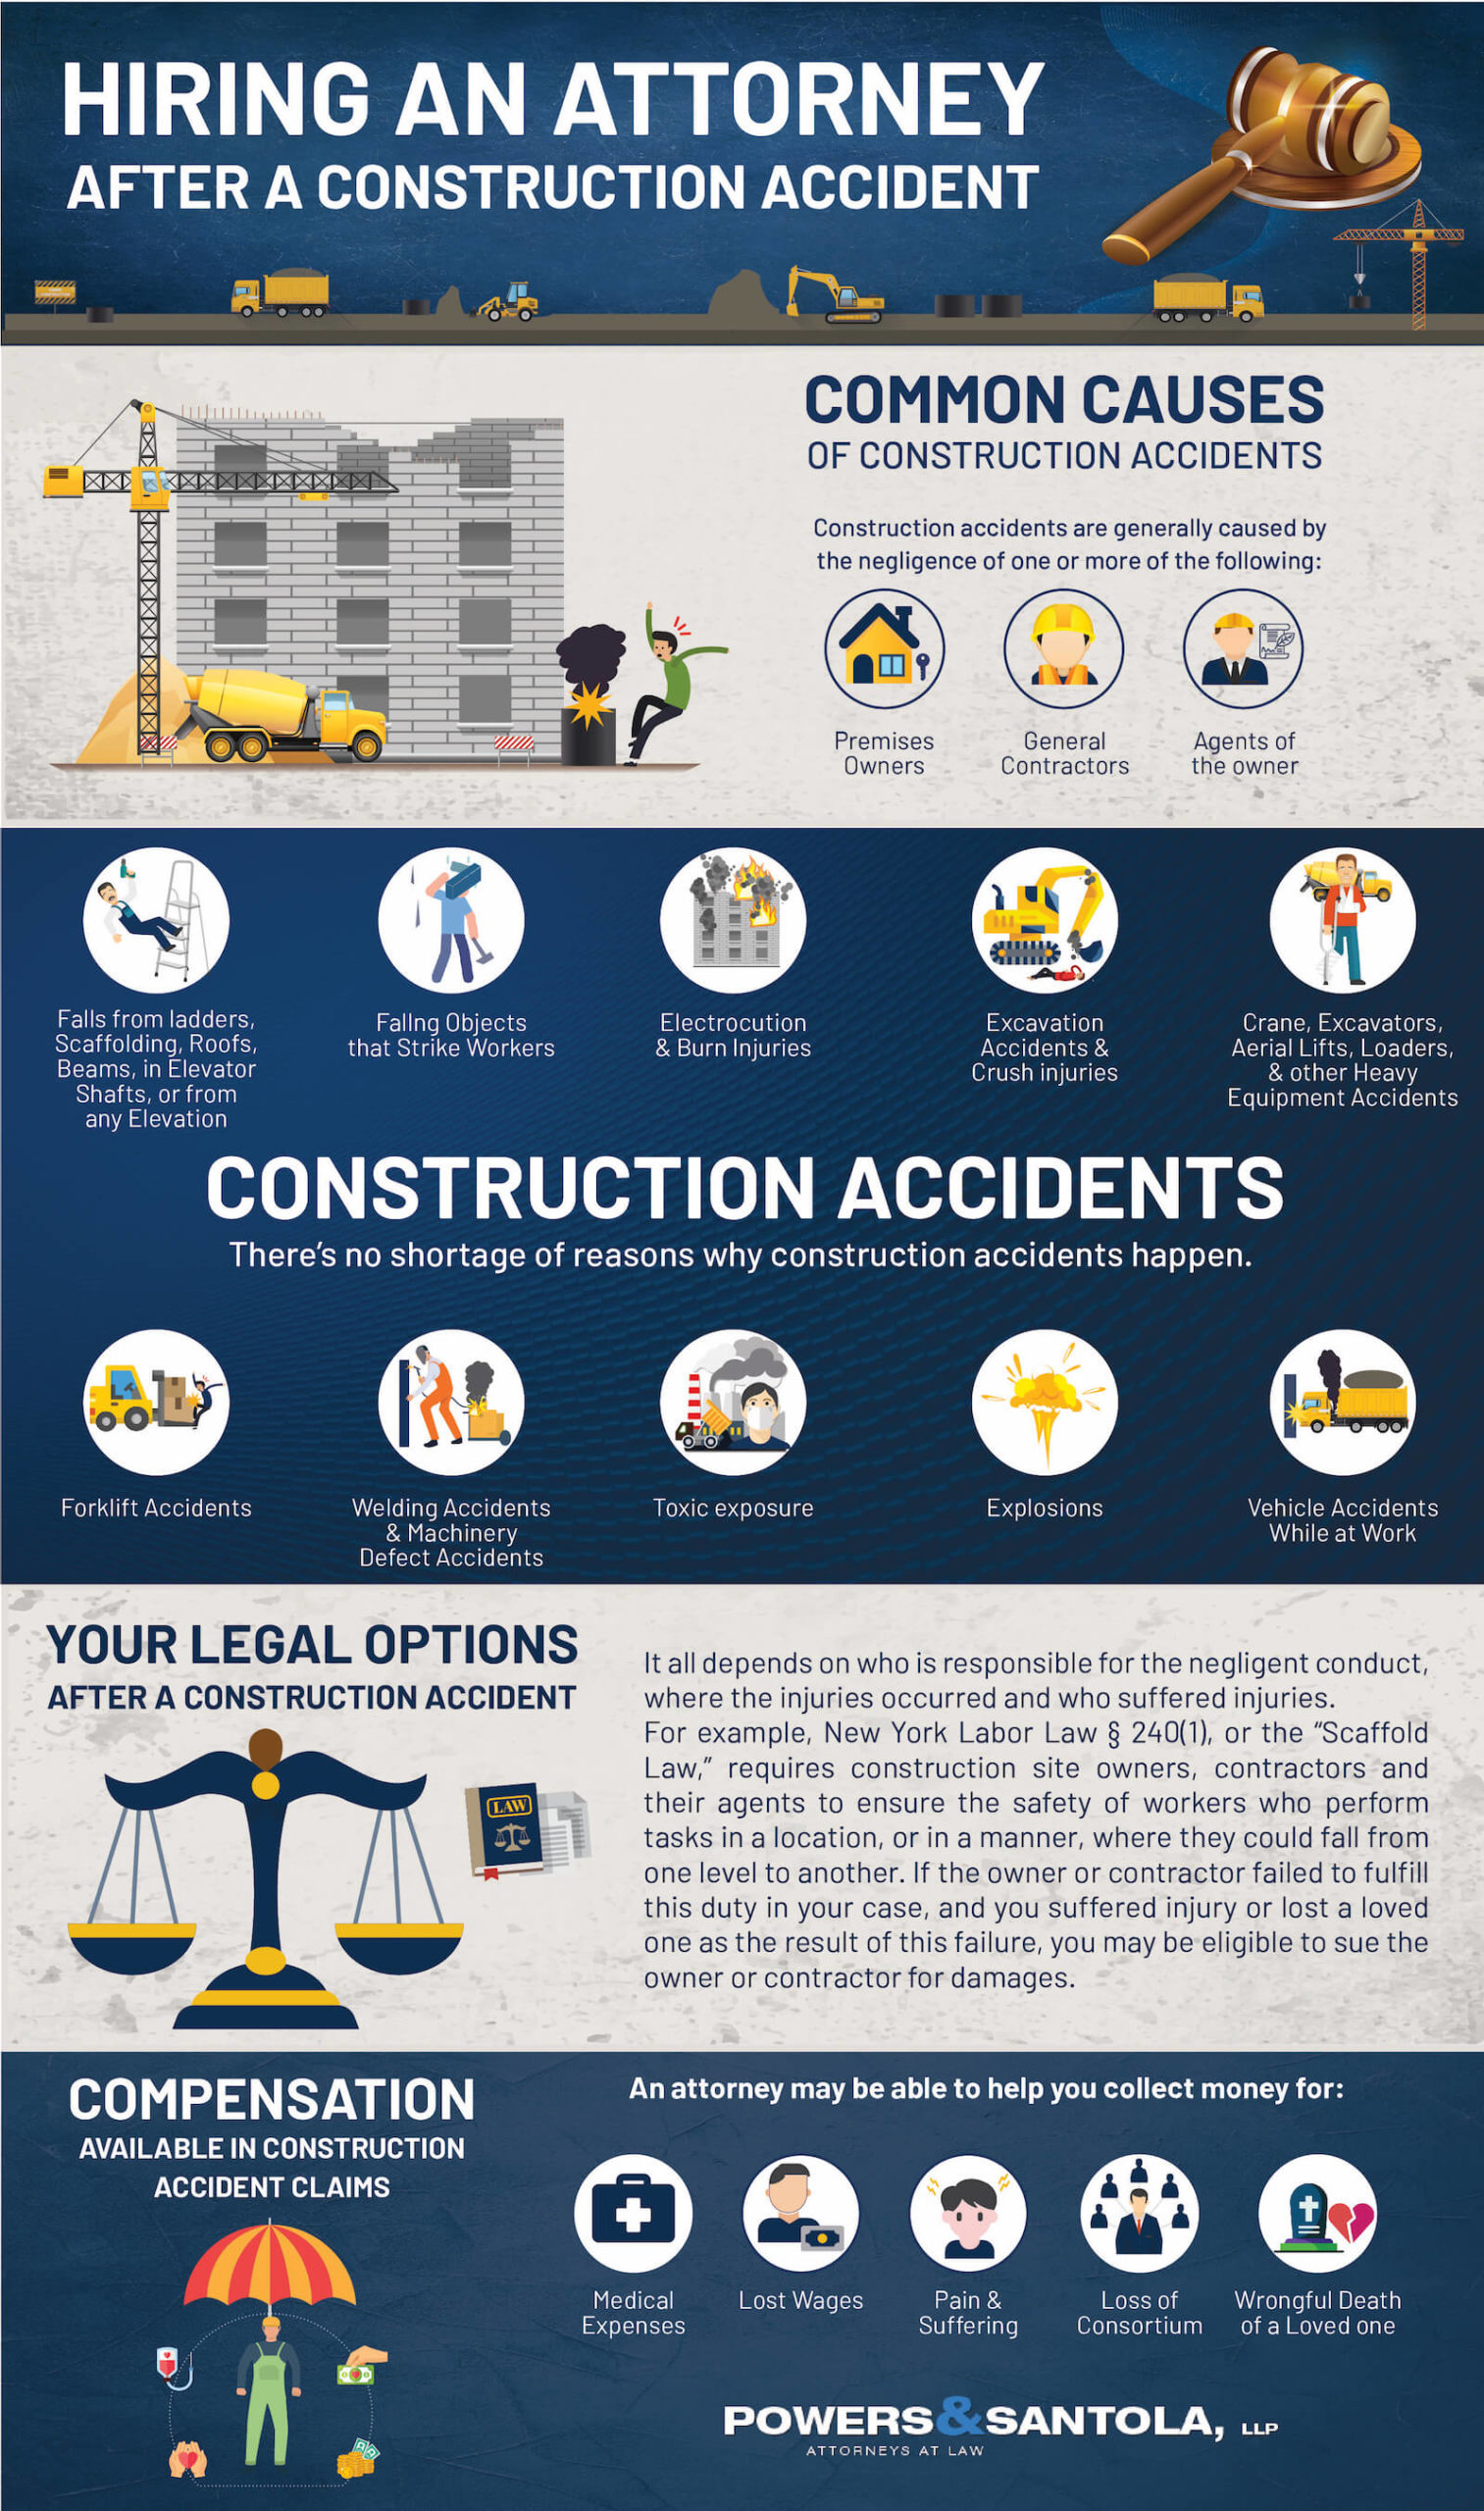 Rochester Construction Accident Lawyers: Powers & Santola, LLP